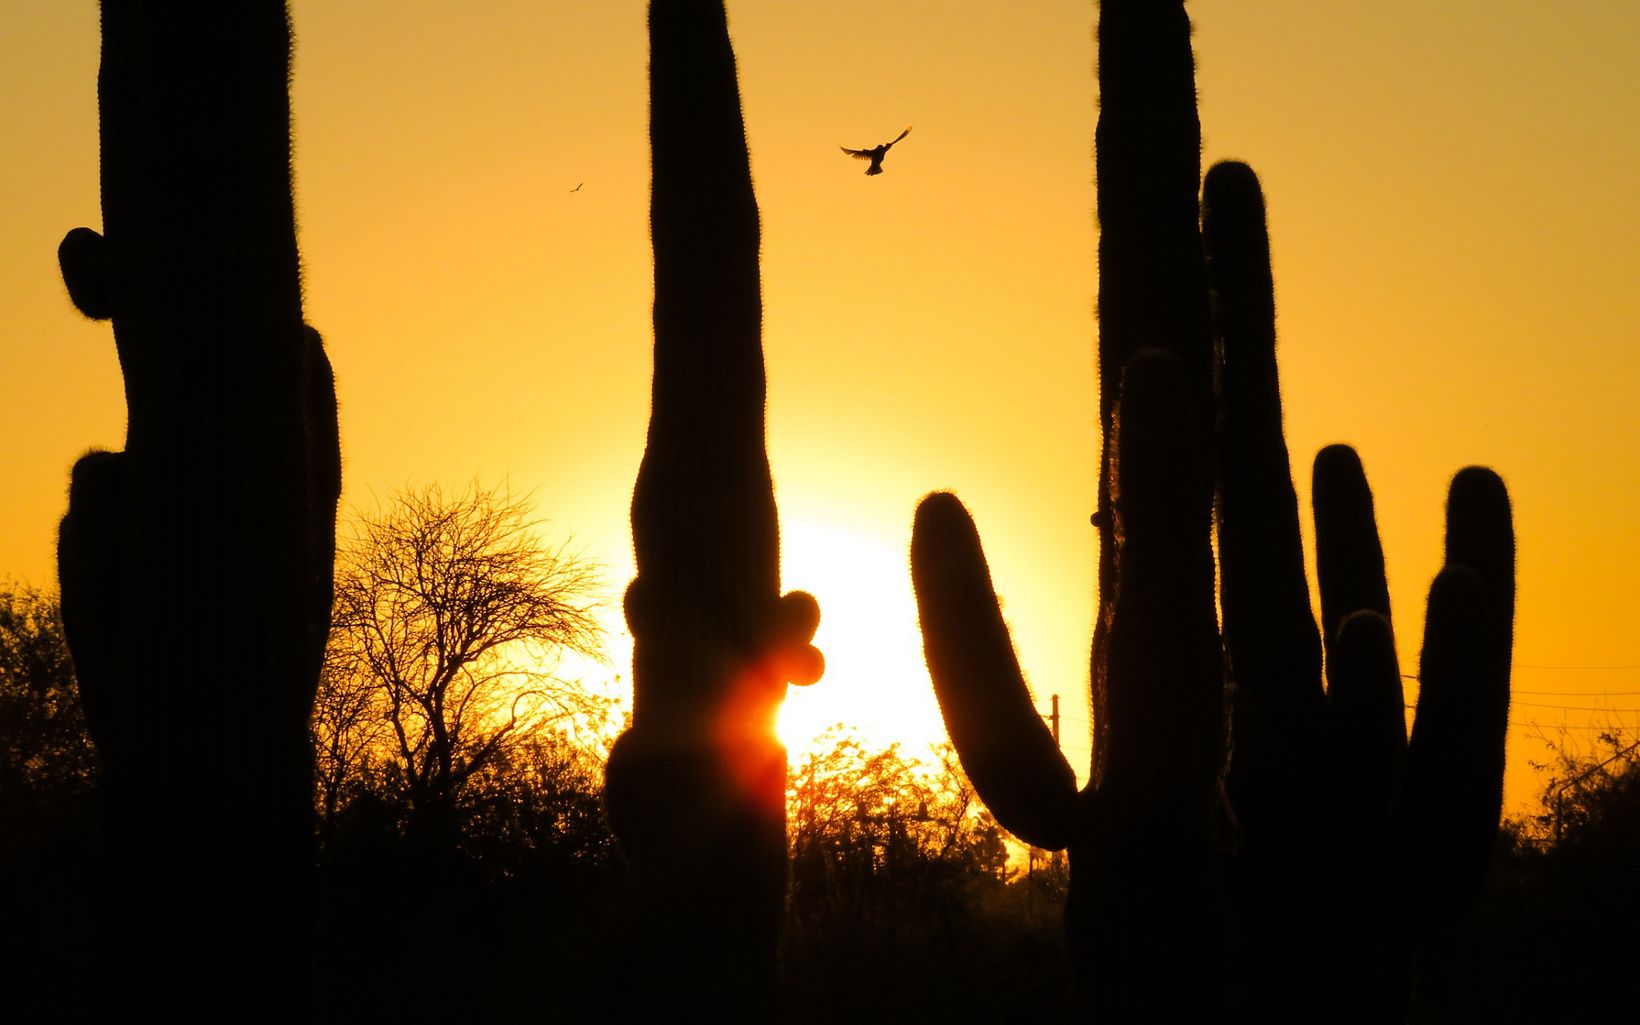 Silhouette of saguaros at sunset with a bird flying overhead.